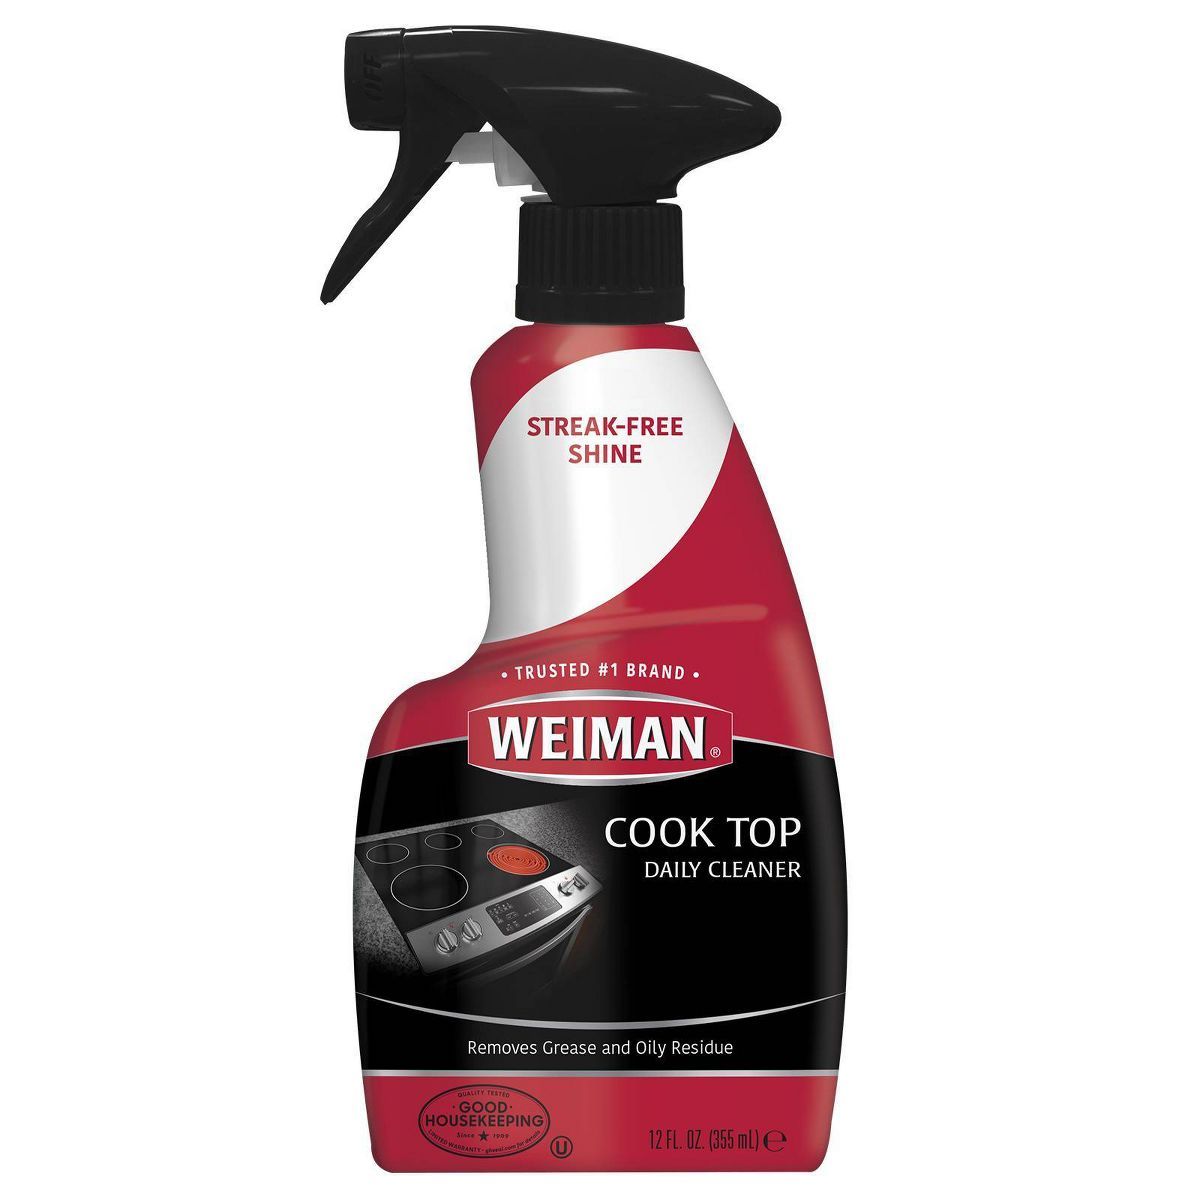 Weiman Cook Top Daily Cleaner - 12oz | Target